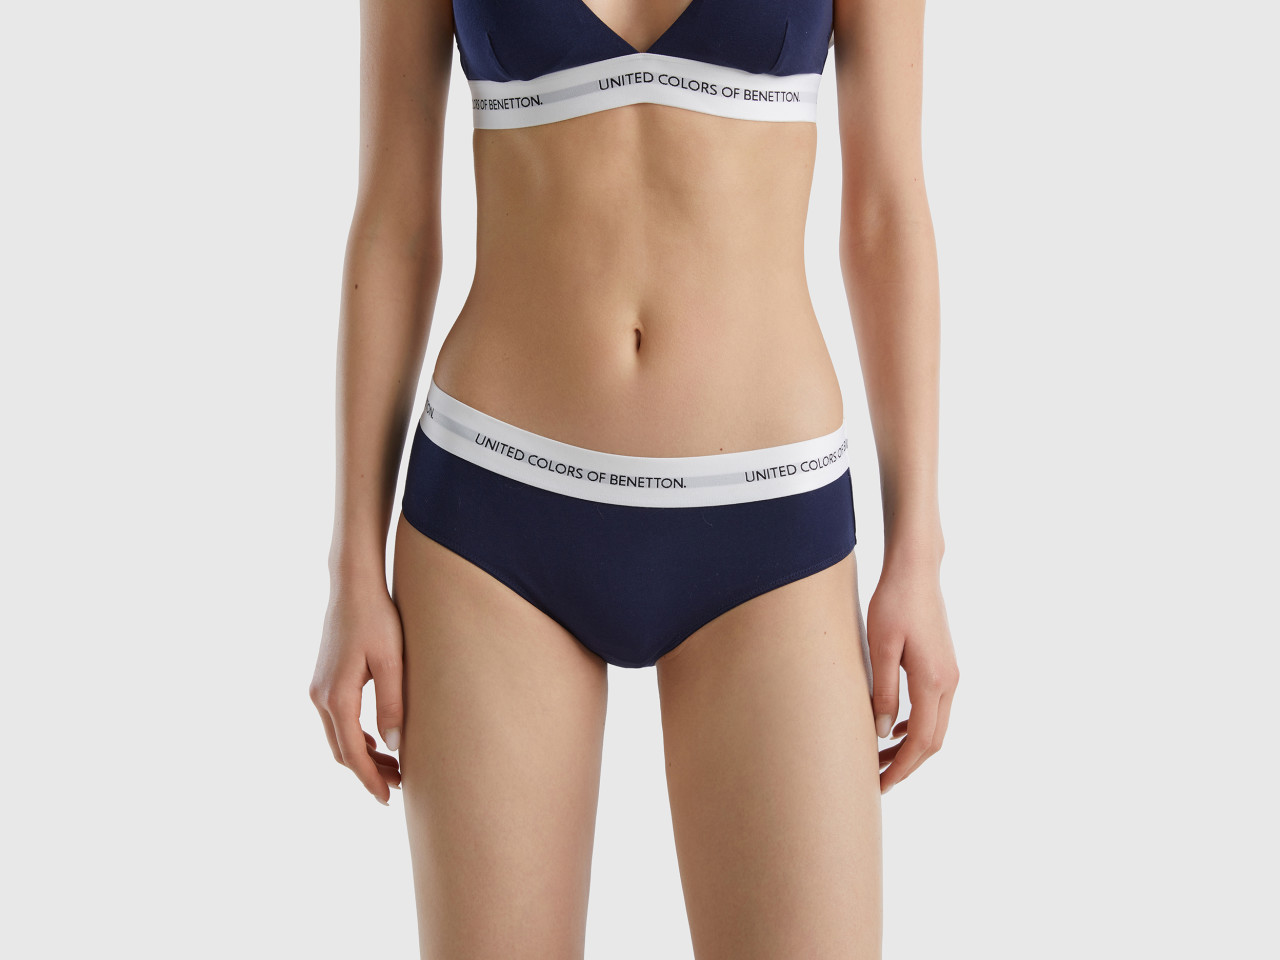 United Colors of Benetton Women Bikini Blue Panty - Buy United Colors of  Benetton Women Bikini Blue Panty Online at Best Prices in India